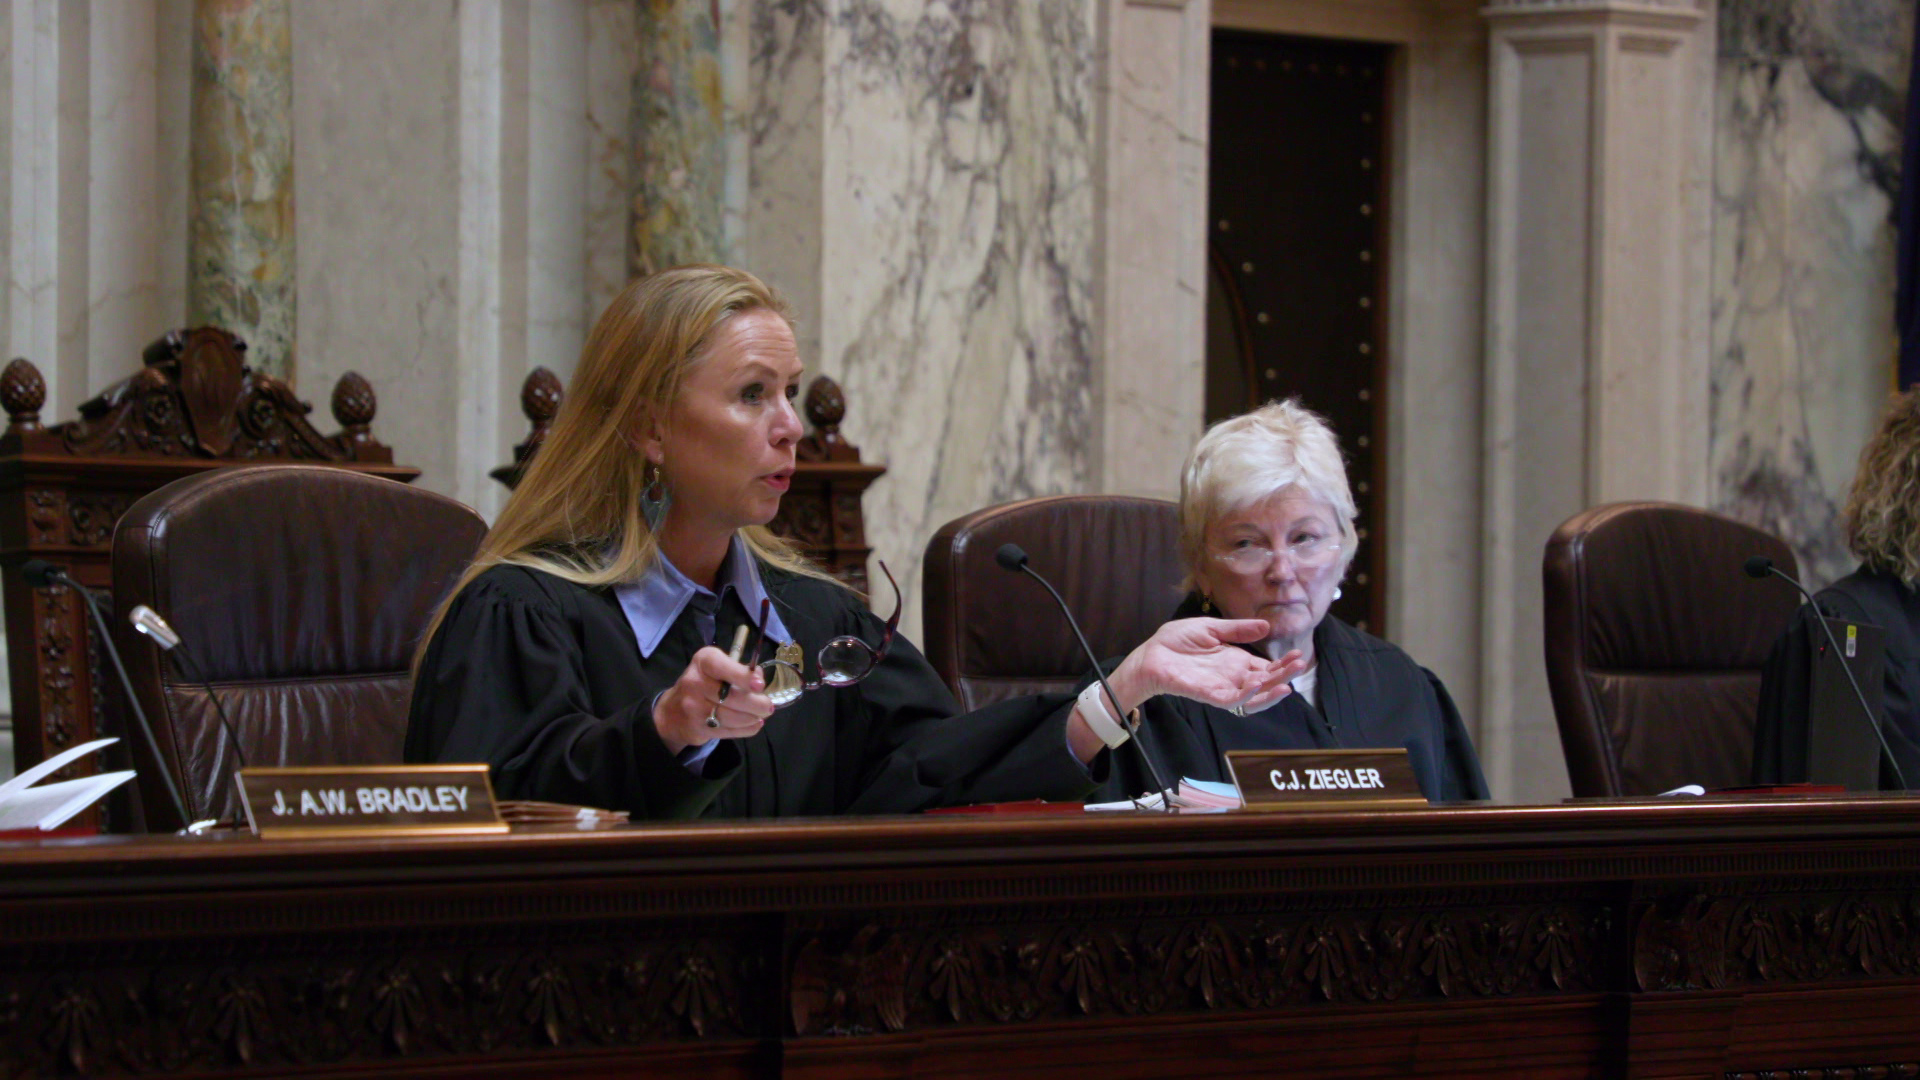 Annette Ziegler sits in her chair at the Wisconsin Supreme Court bench and speaks into a microphone while gesturing with both hands, one of which is holding a pen and glasses, with Patience Roggensack listening while seated next to her.